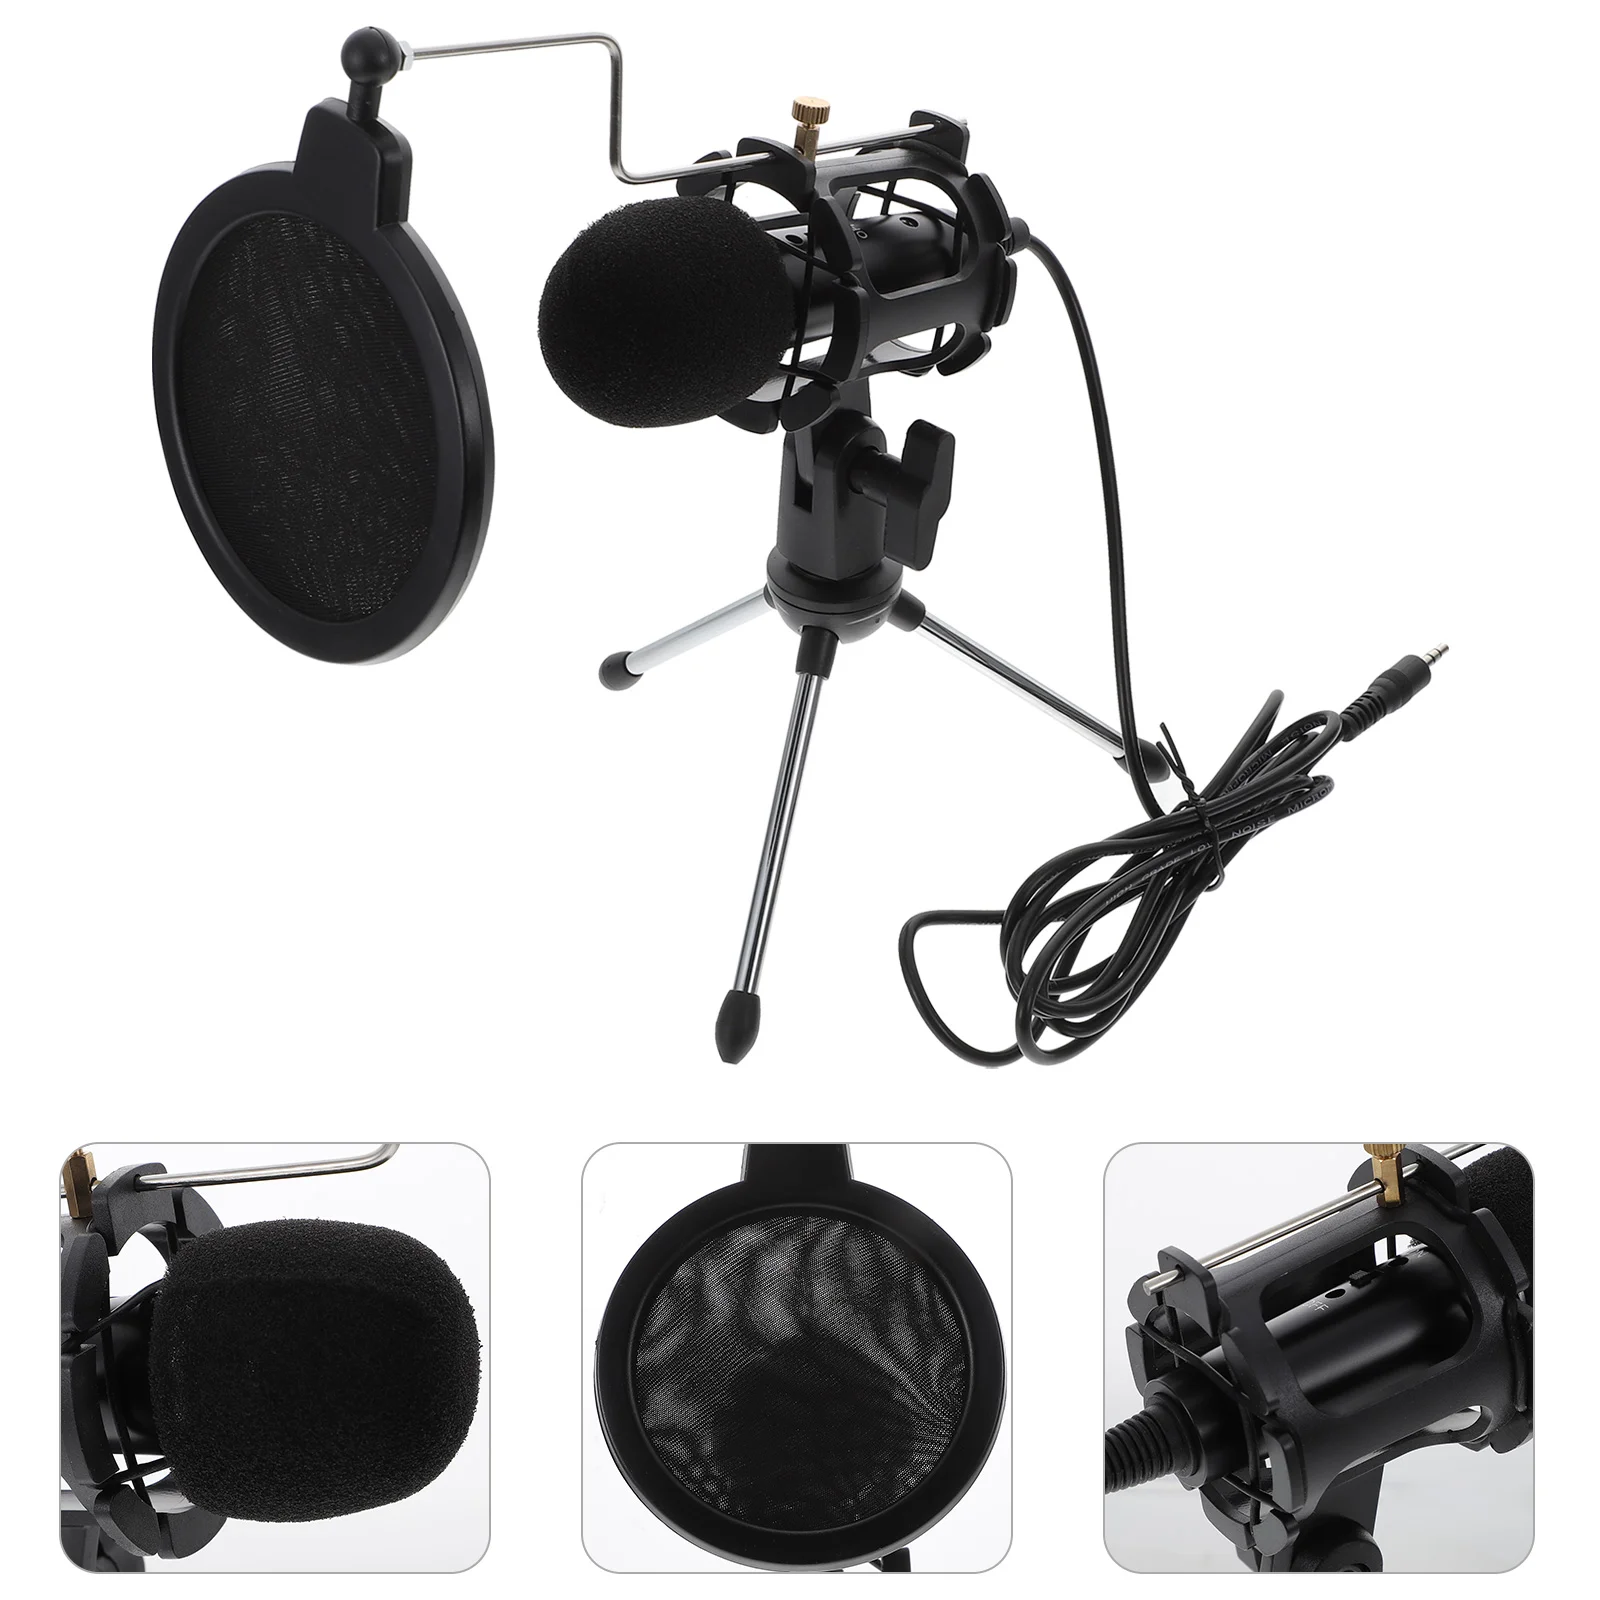 

Live Microphone Studio Condenser Mini Microphones Podcast Professional Computer Gaming Mic For Podcast Laptop Desktop PC